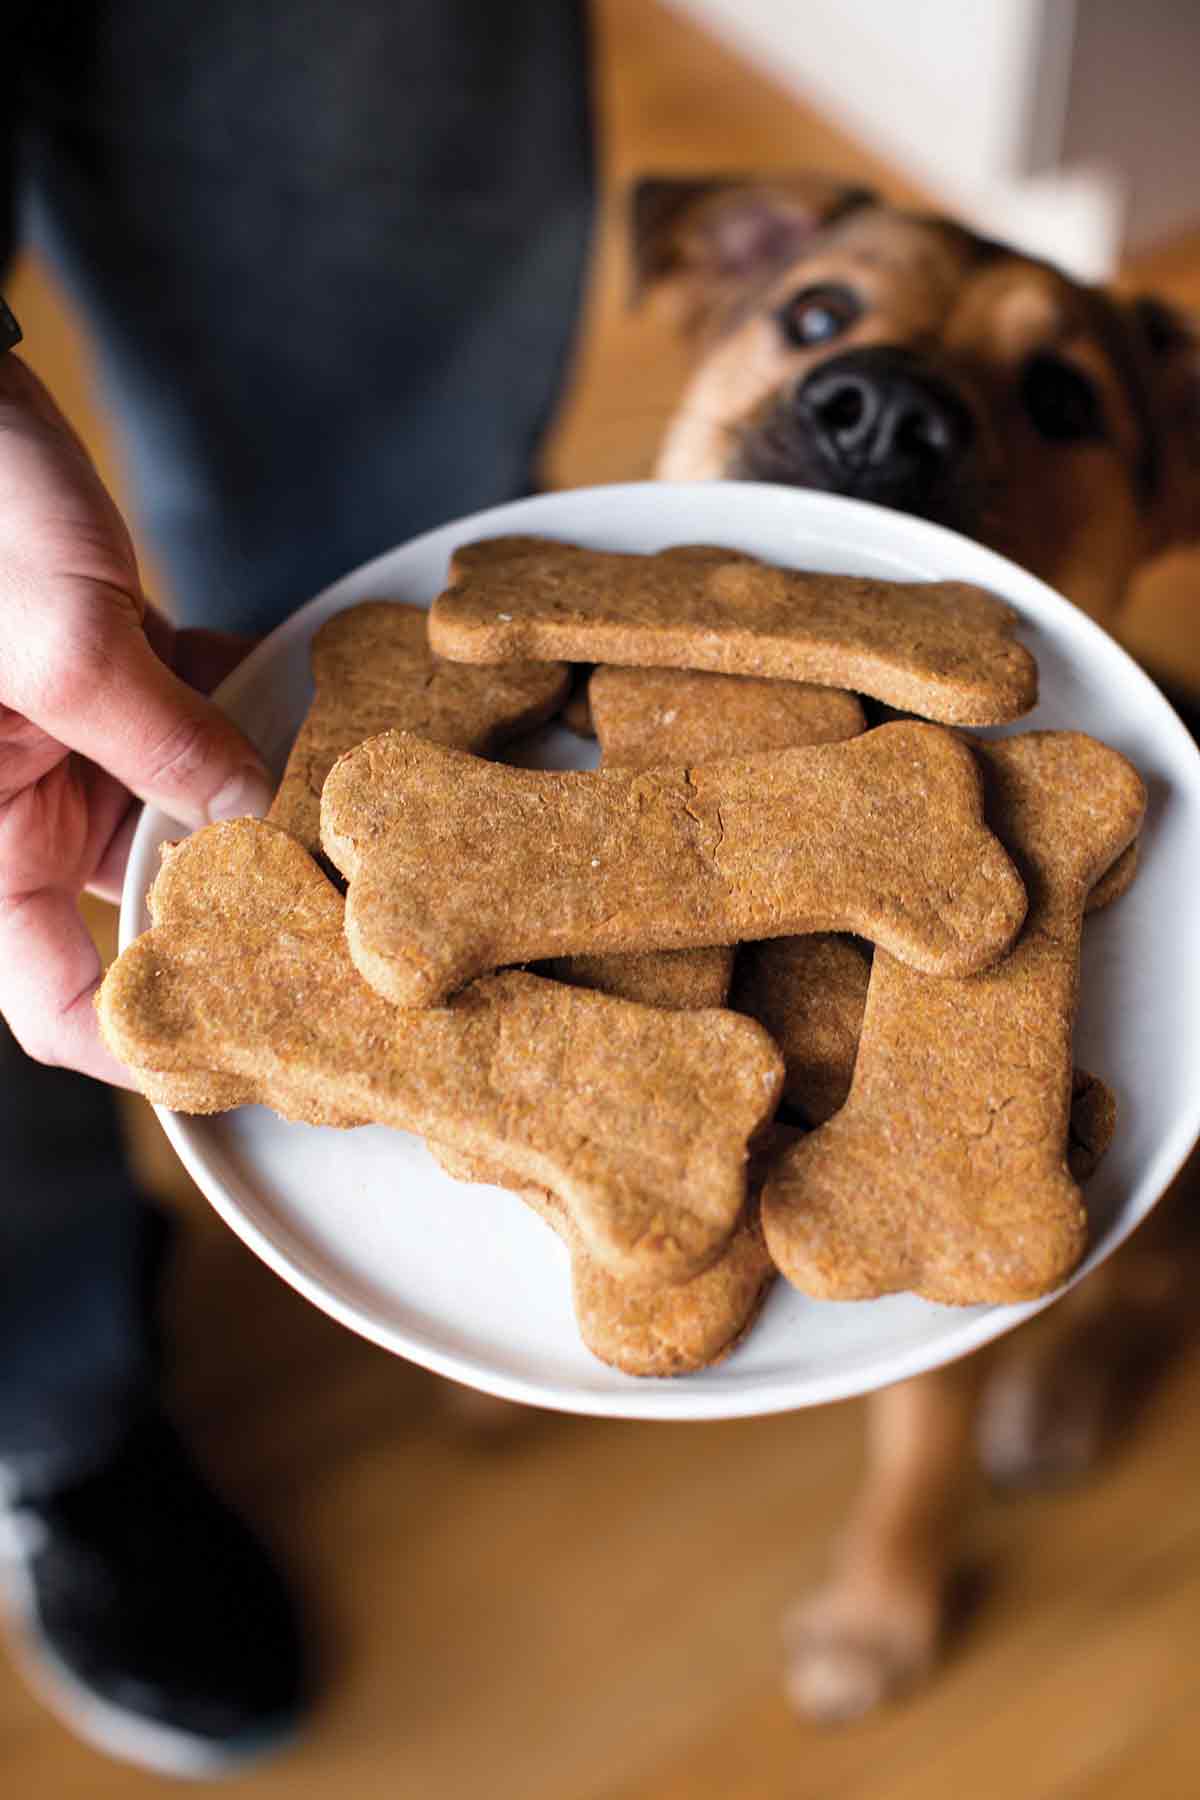 making your own dog treats